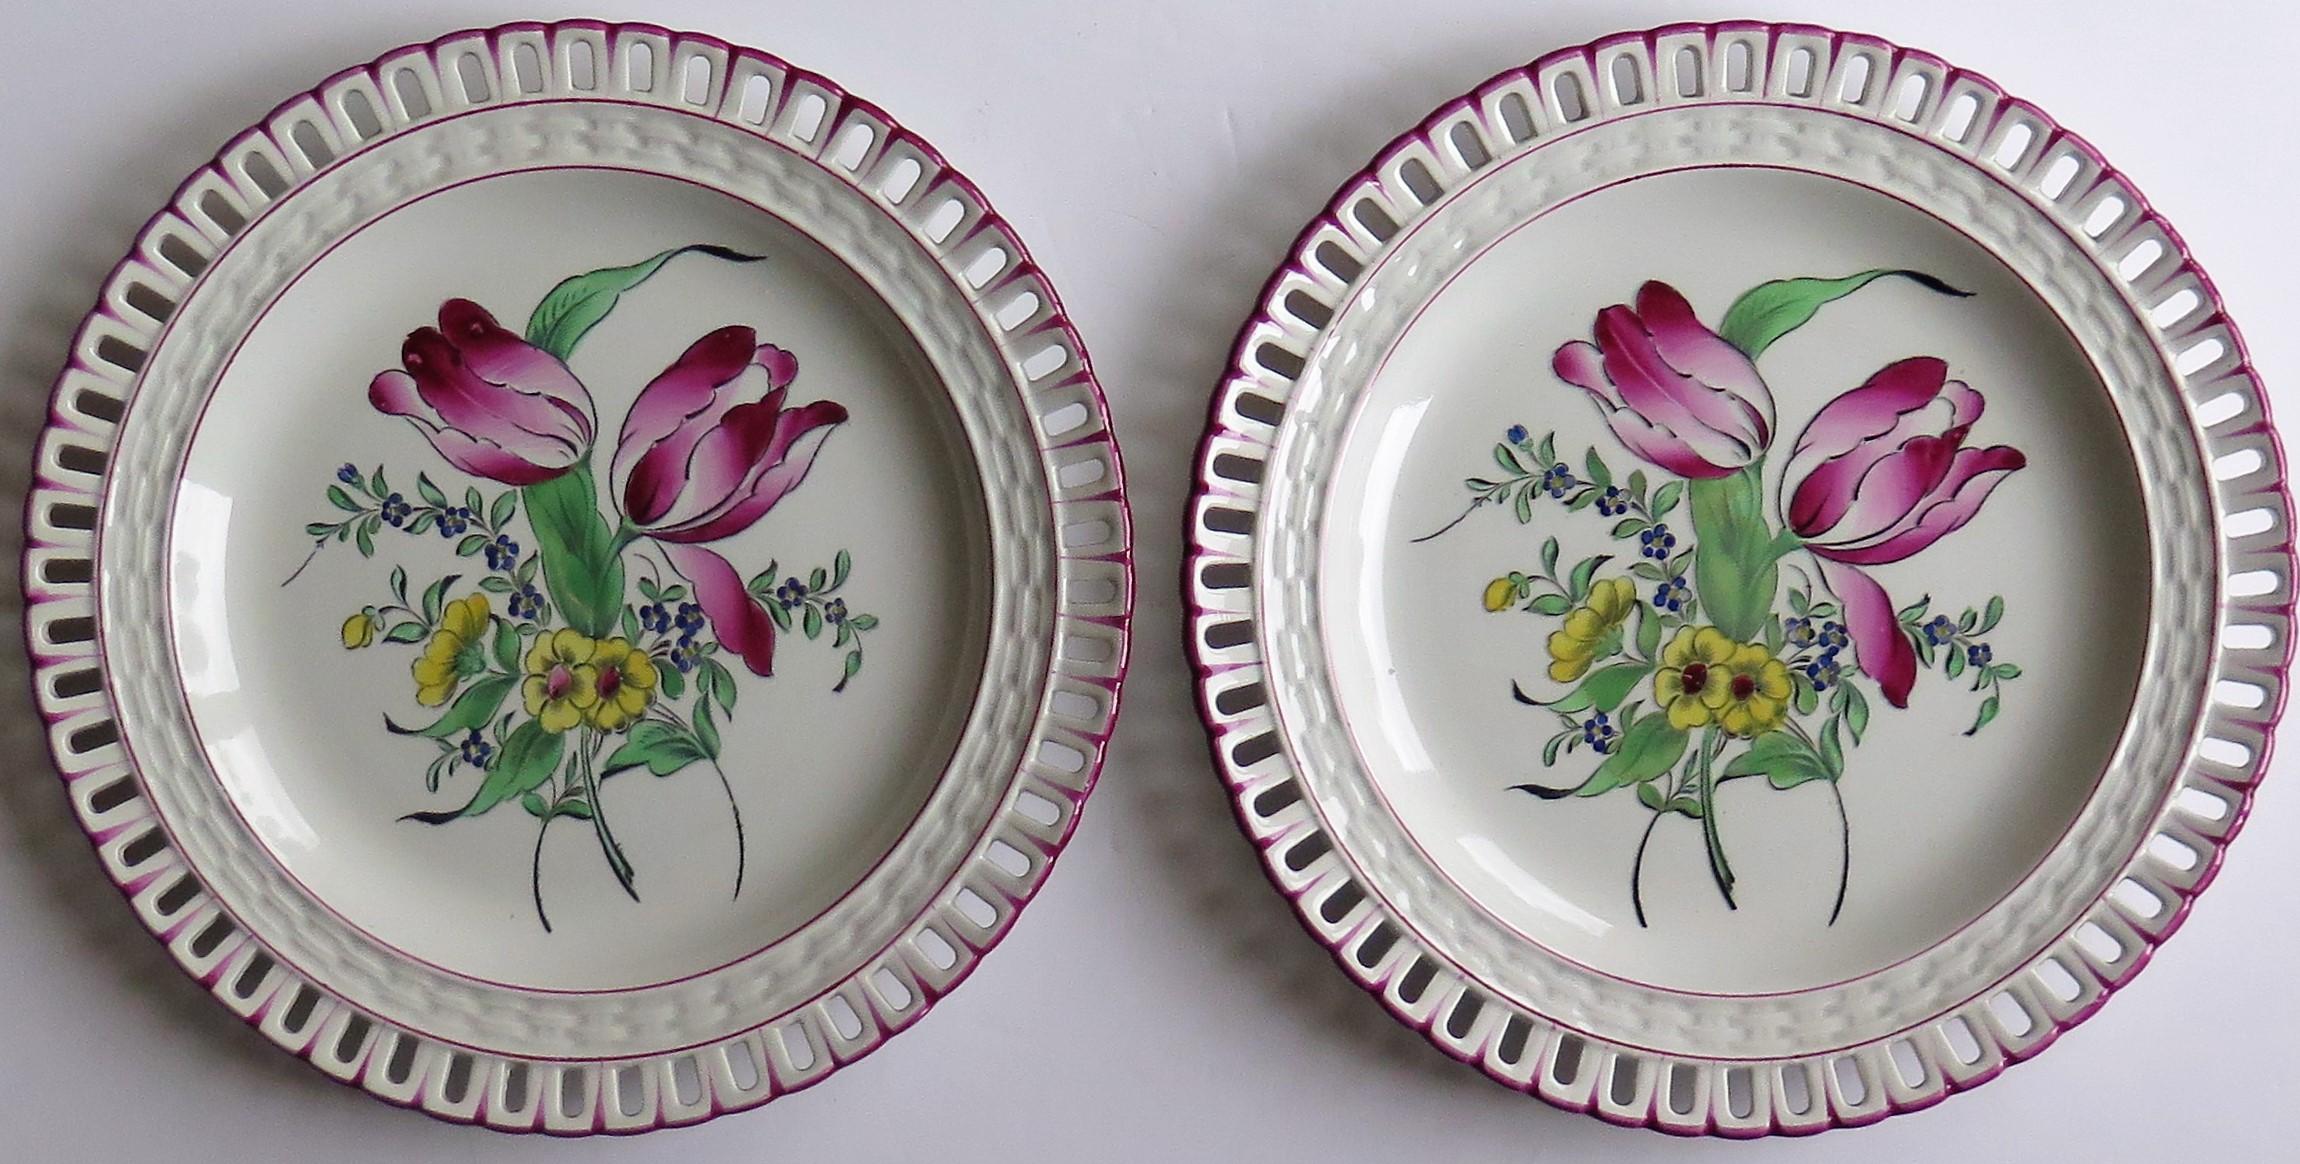 These are a beautiful pair of French Faience dinner plates with pierced rims, made by the Luneville K&G factory and dating to the late 19th century, circa 1895.

These large circular earthenware pottery plates are well potted with pierced